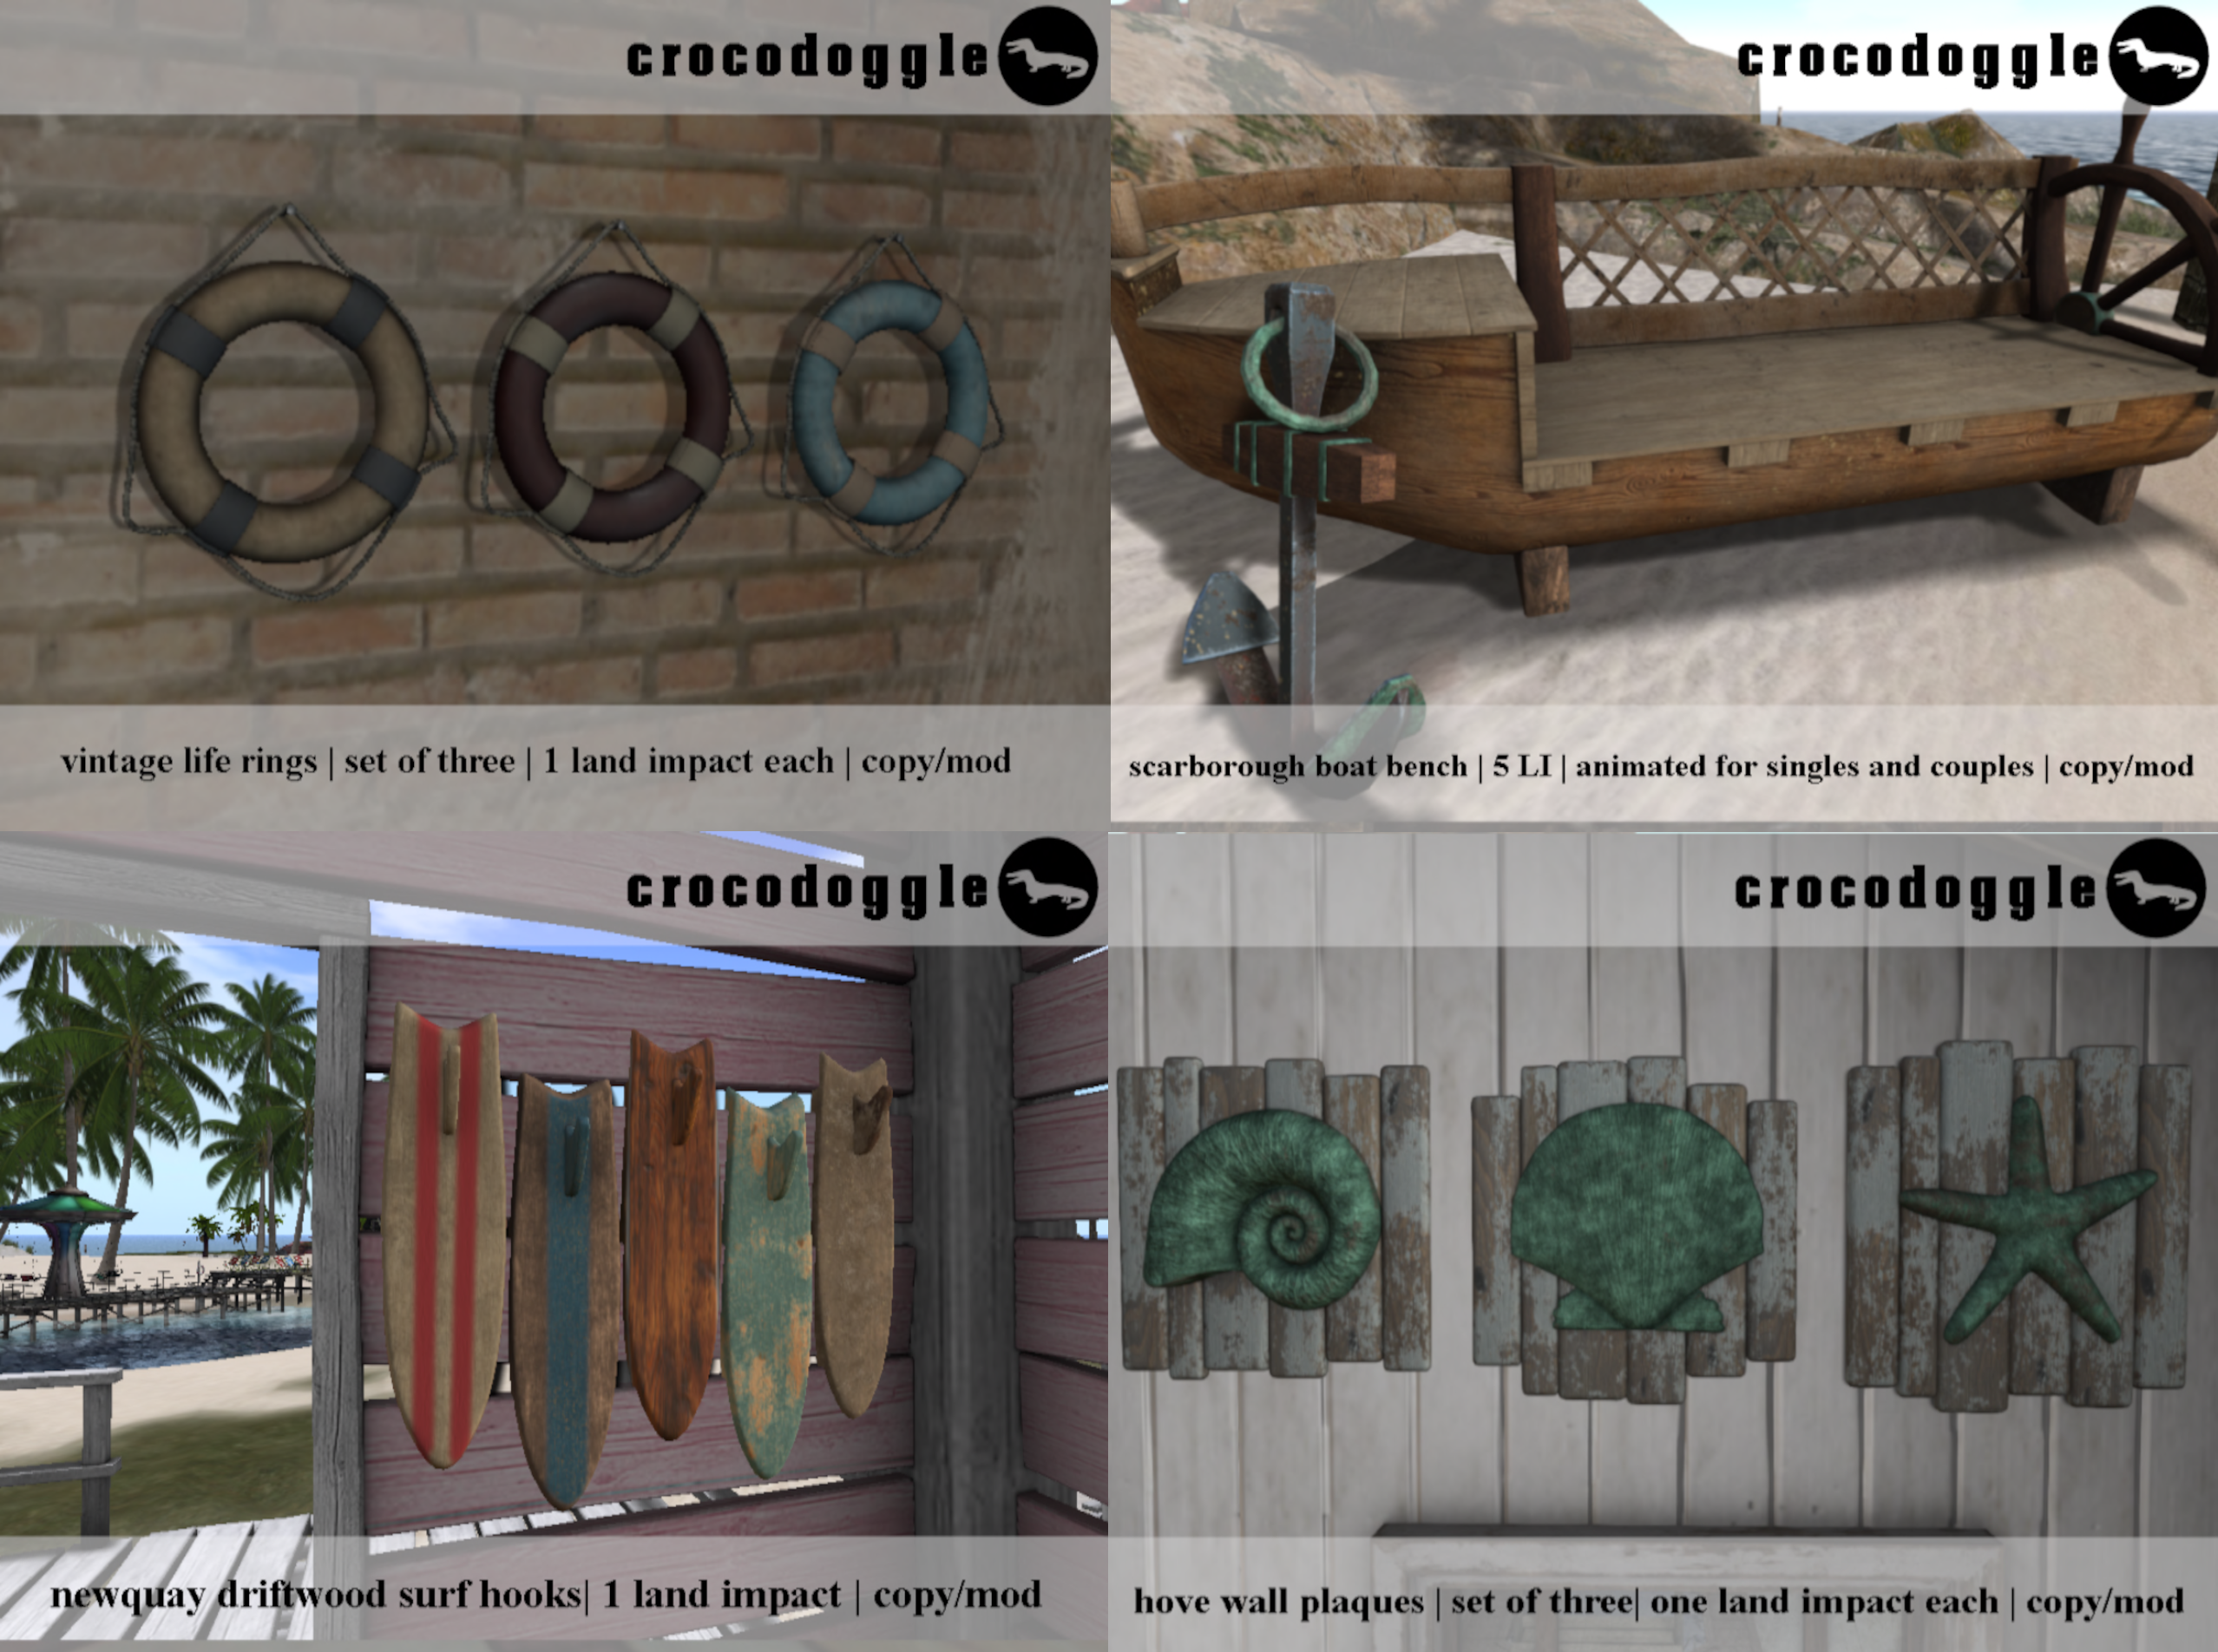 Crocodoggle – Vintage Life Rings, Scarborough Bench, Newquay Driftwood Surf Hooks, & Hove Wall Plaques